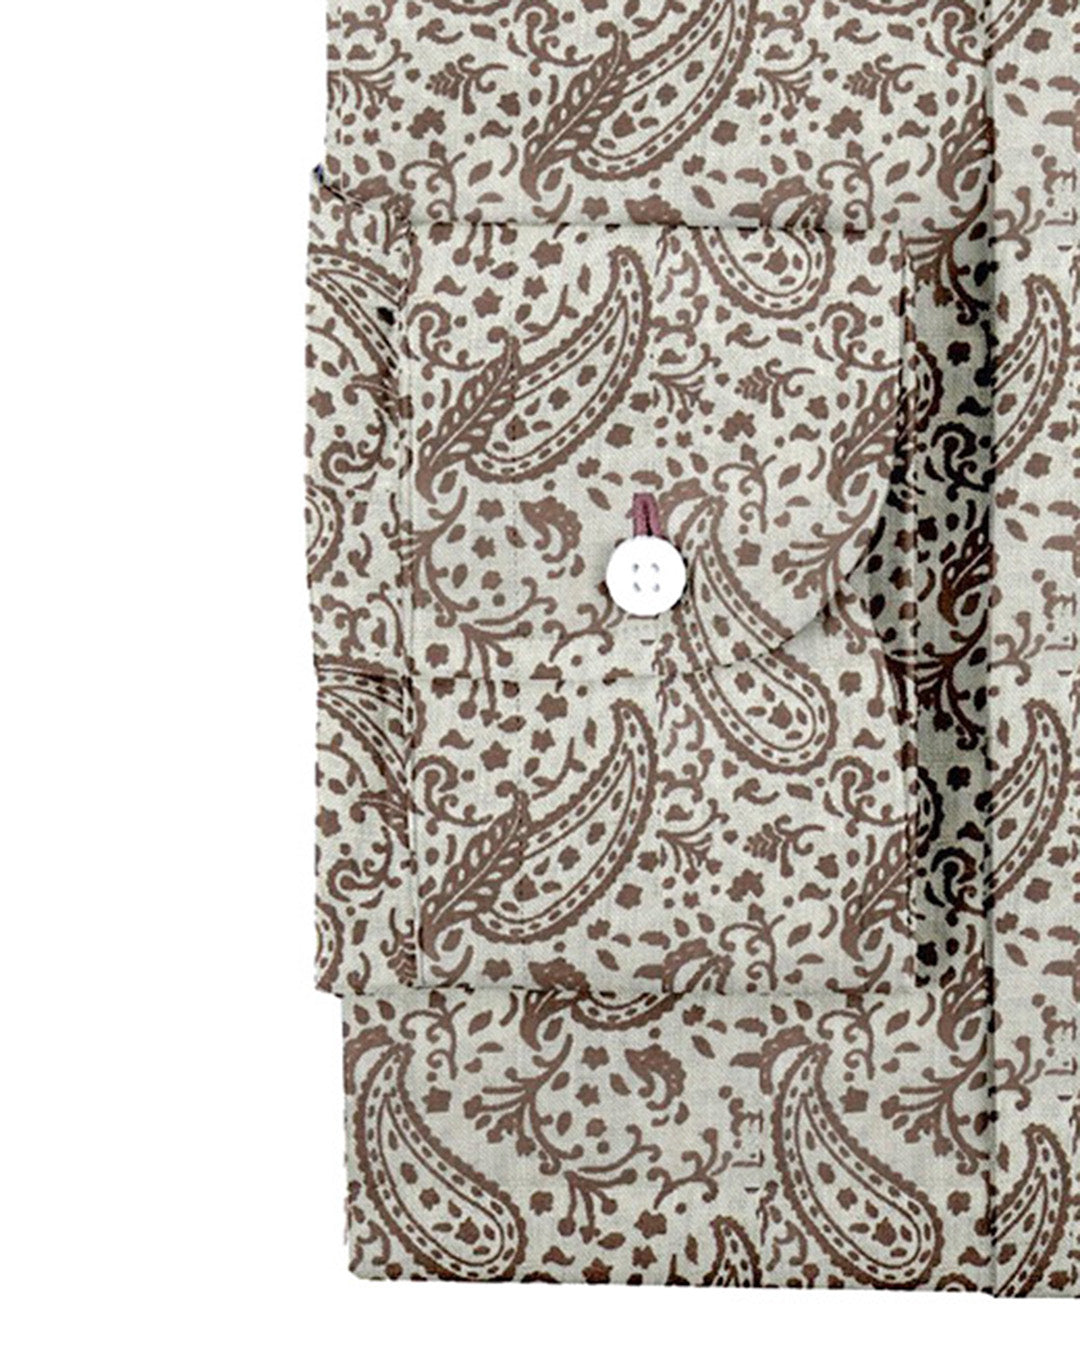 Cuff of custom linen shirt for men in brown printed paisley